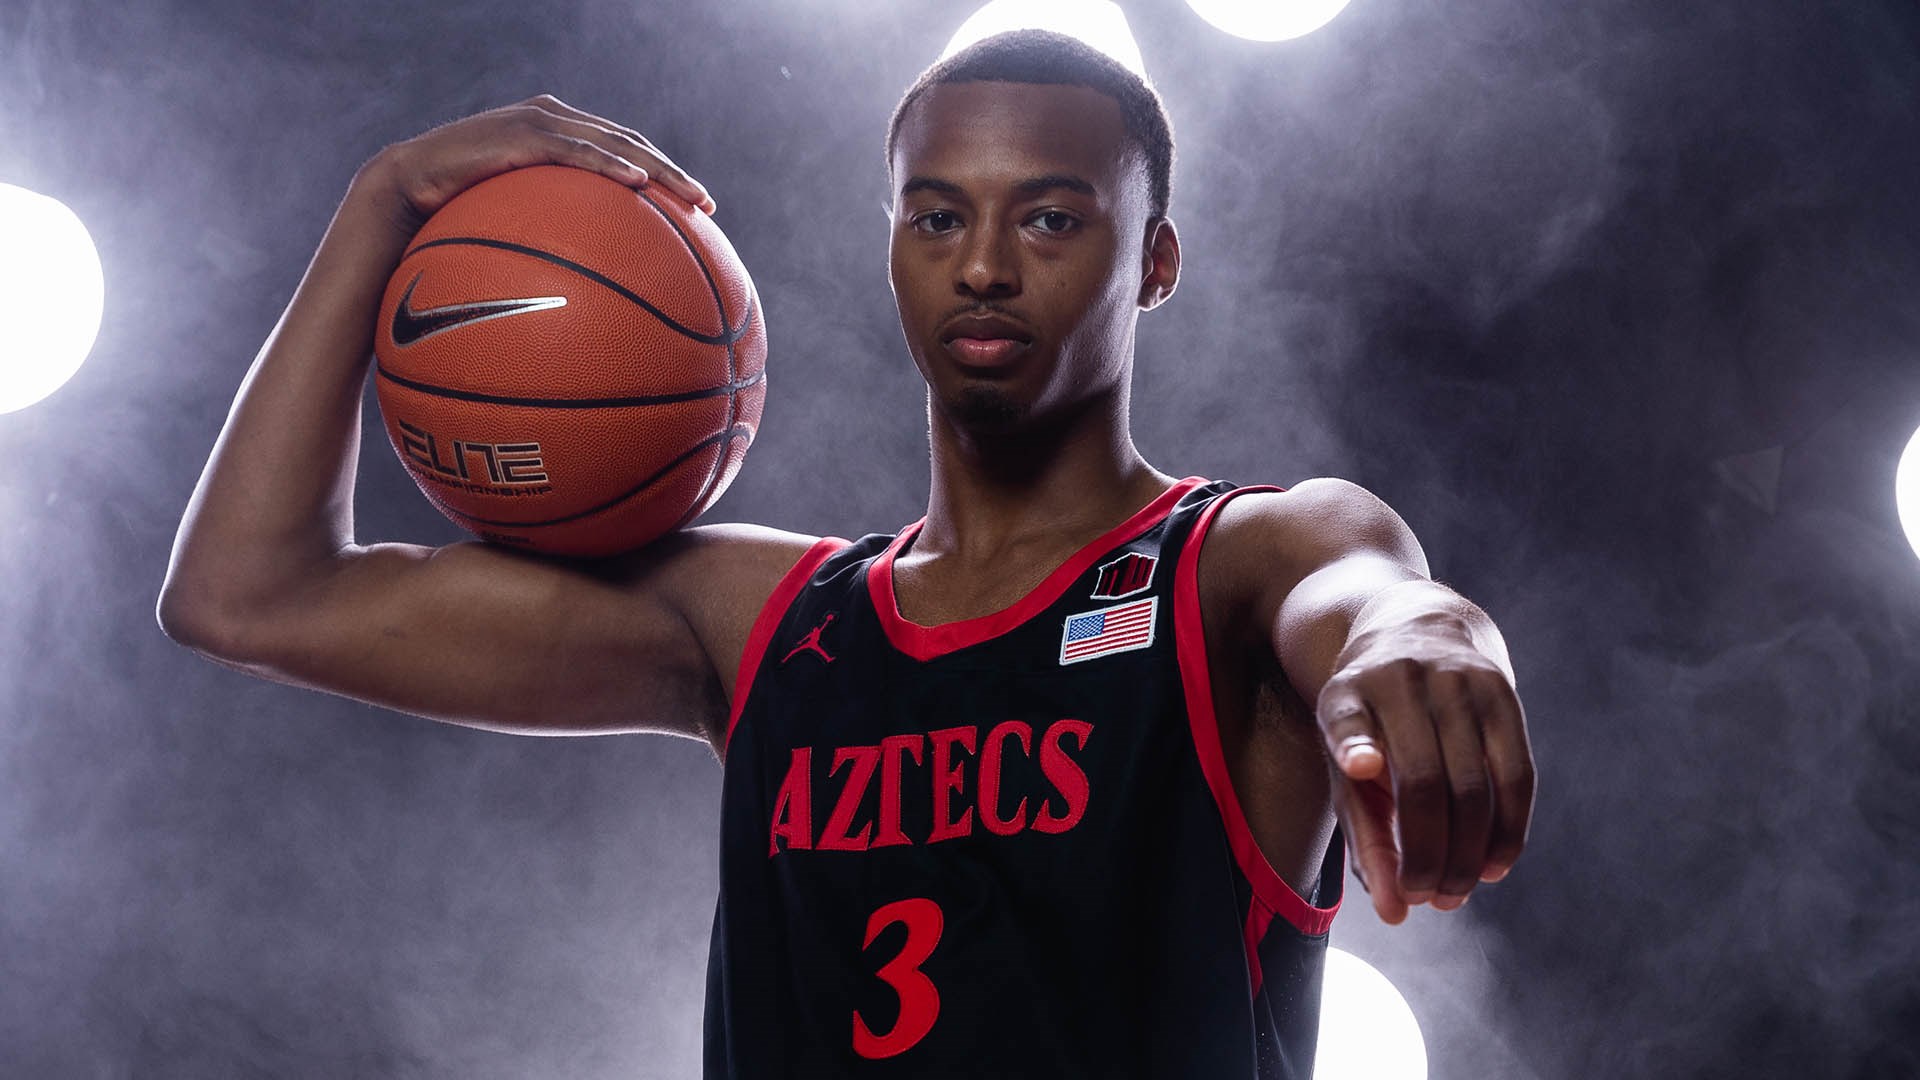 Micah Parrish San Diego State basketball guards holding a basketball.